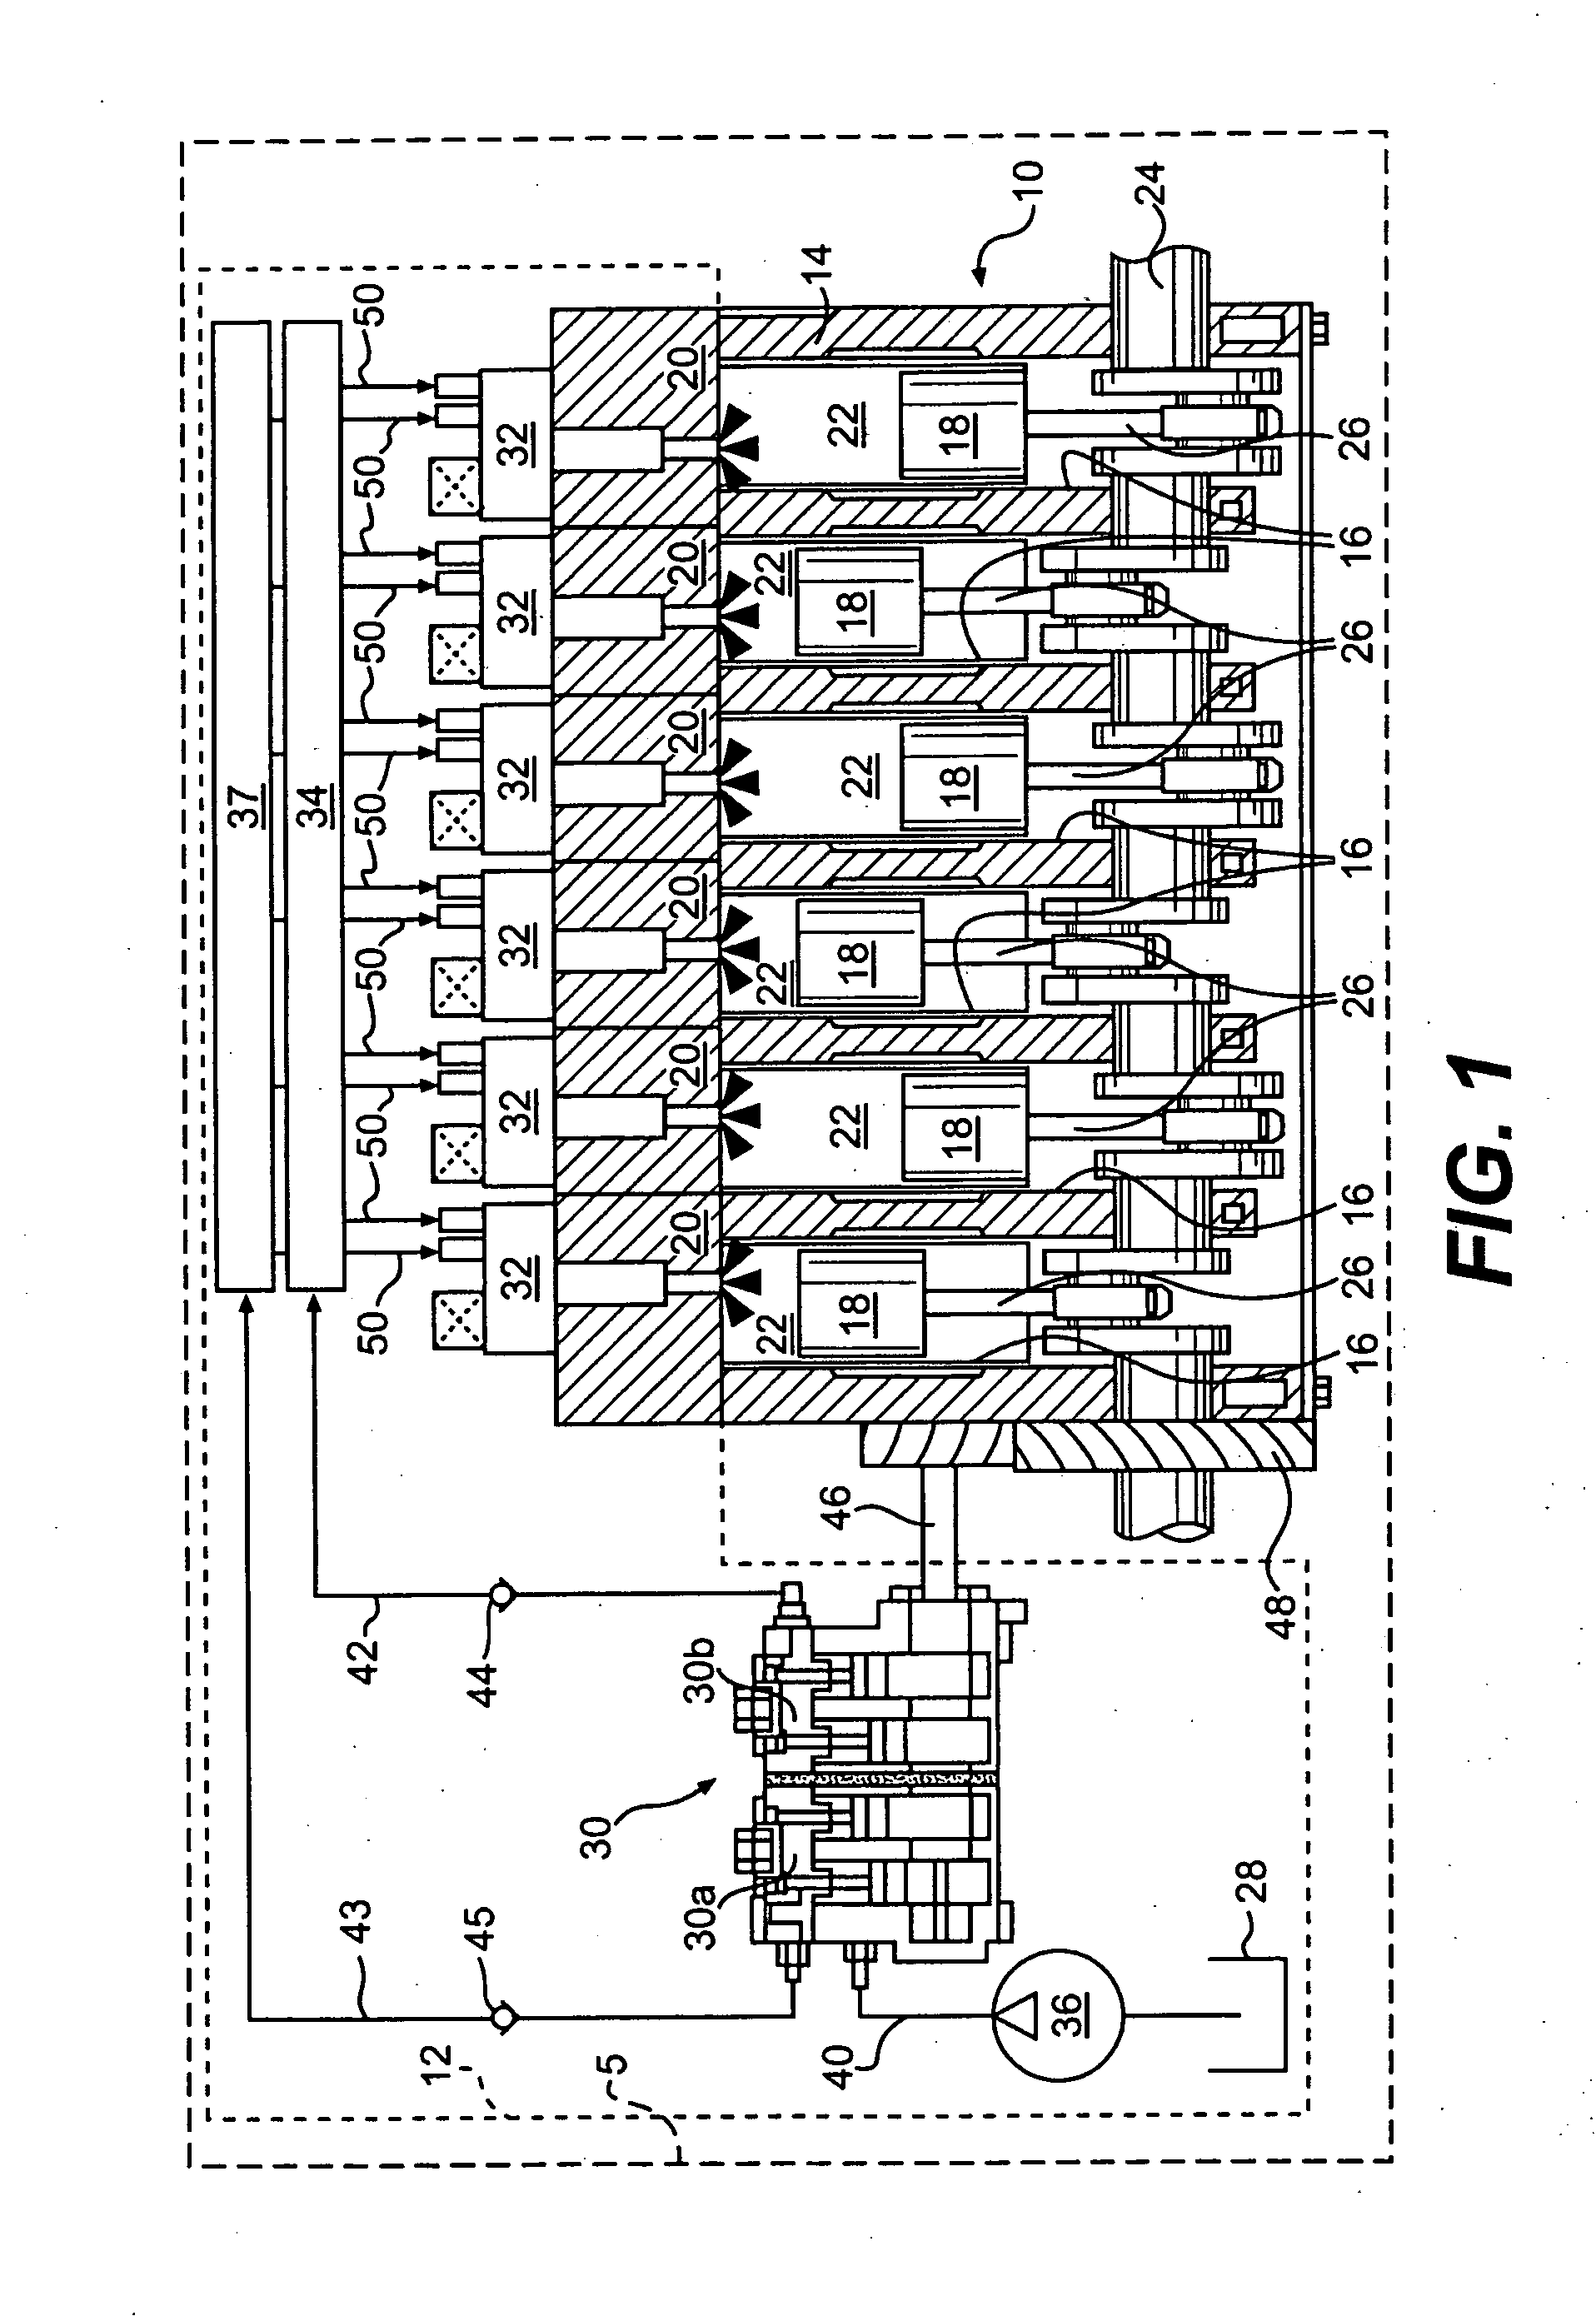 Multi-source fuel system for variable pressure injection